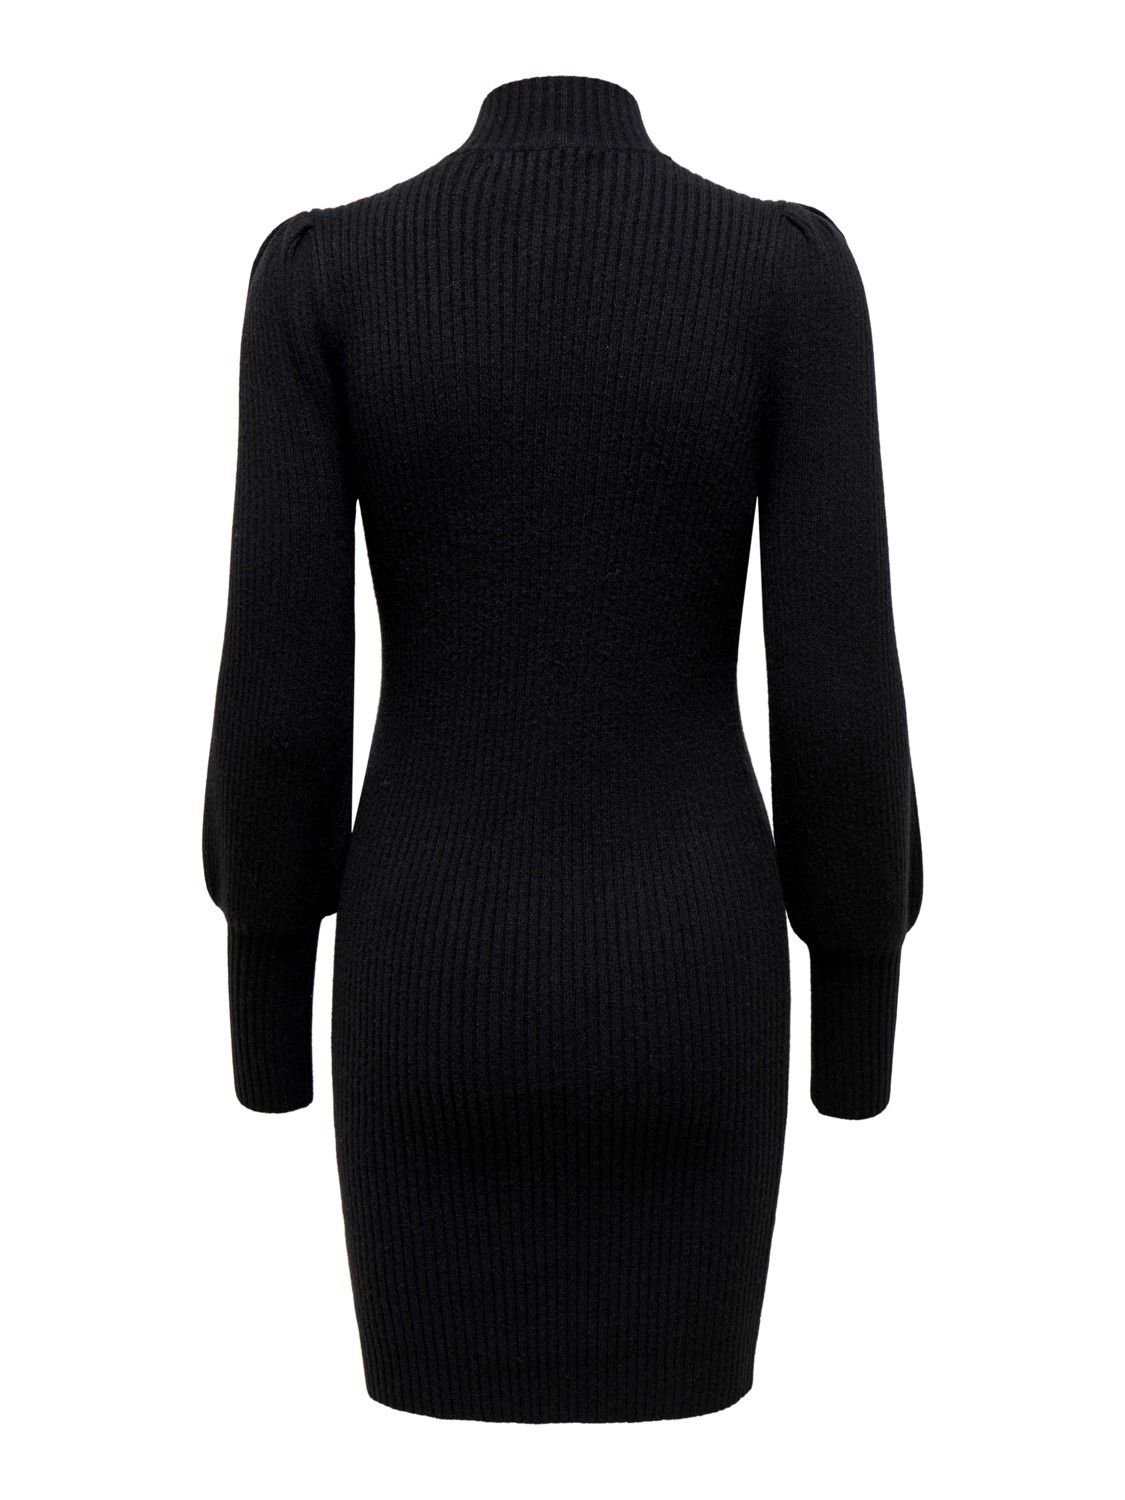 Brand: Only Gender: Women Type: Dresses Season: Fall/Winter  PRODUCT DETAIL • Color: black • Sleeves: long • Neckline: turtleneck  COMPOSITION AND MATERIAL • Composition: -27% nylon -23% polyester -50% viscose  •  Washing: machine wash at 30°